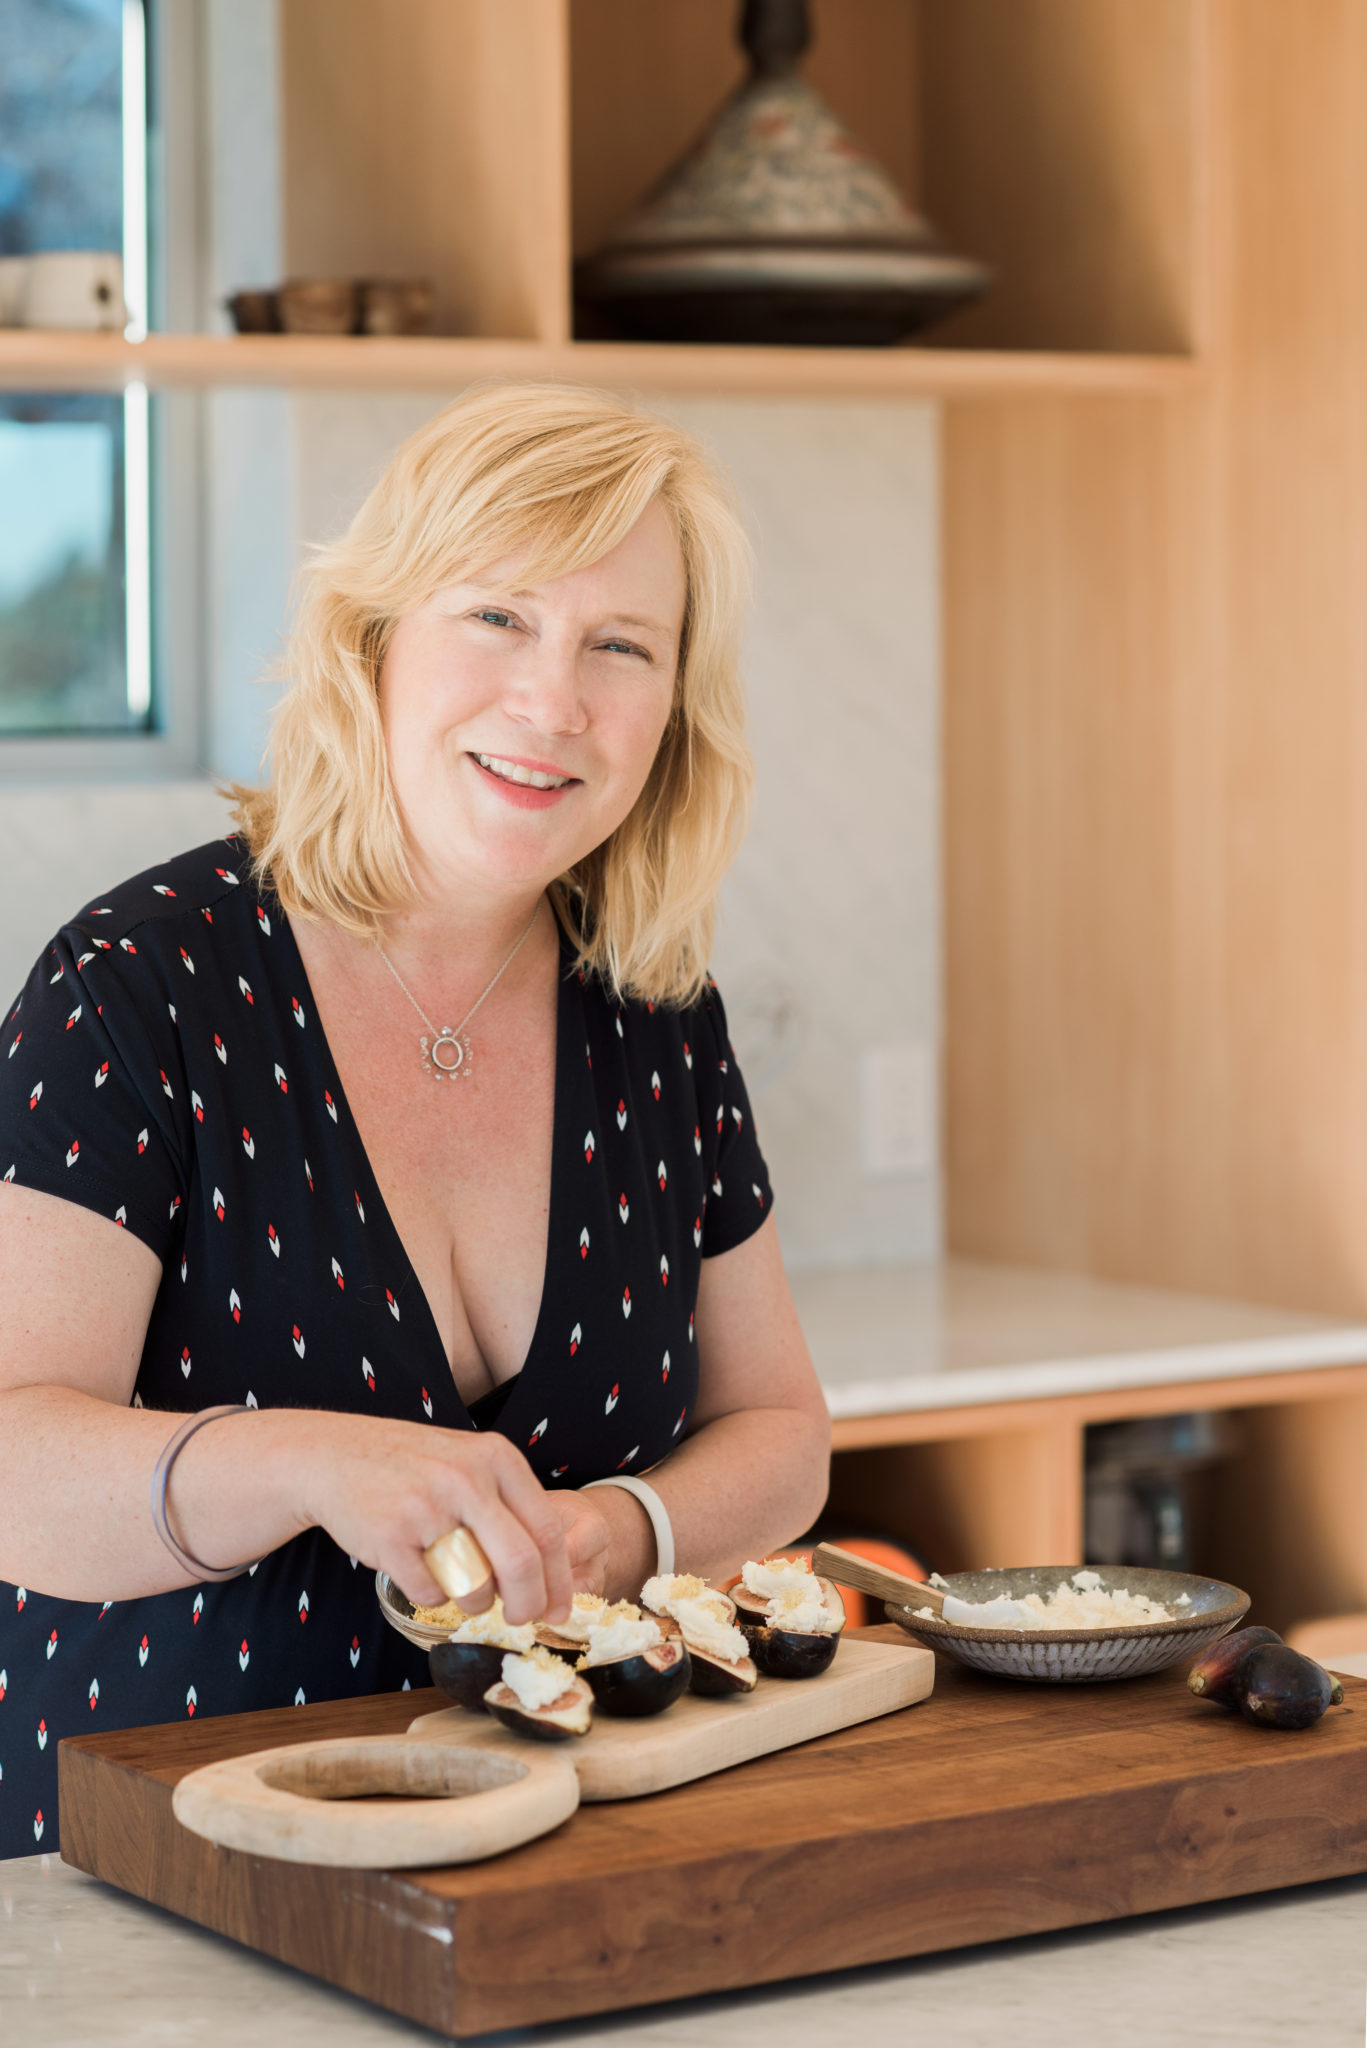 Chef Hollie Green Rottman loves bringing her cooking talents home and especially loves cooking Mediterranean cuisine. Here she is making figs with marsclpon/ honey spread topped with lemon zest.